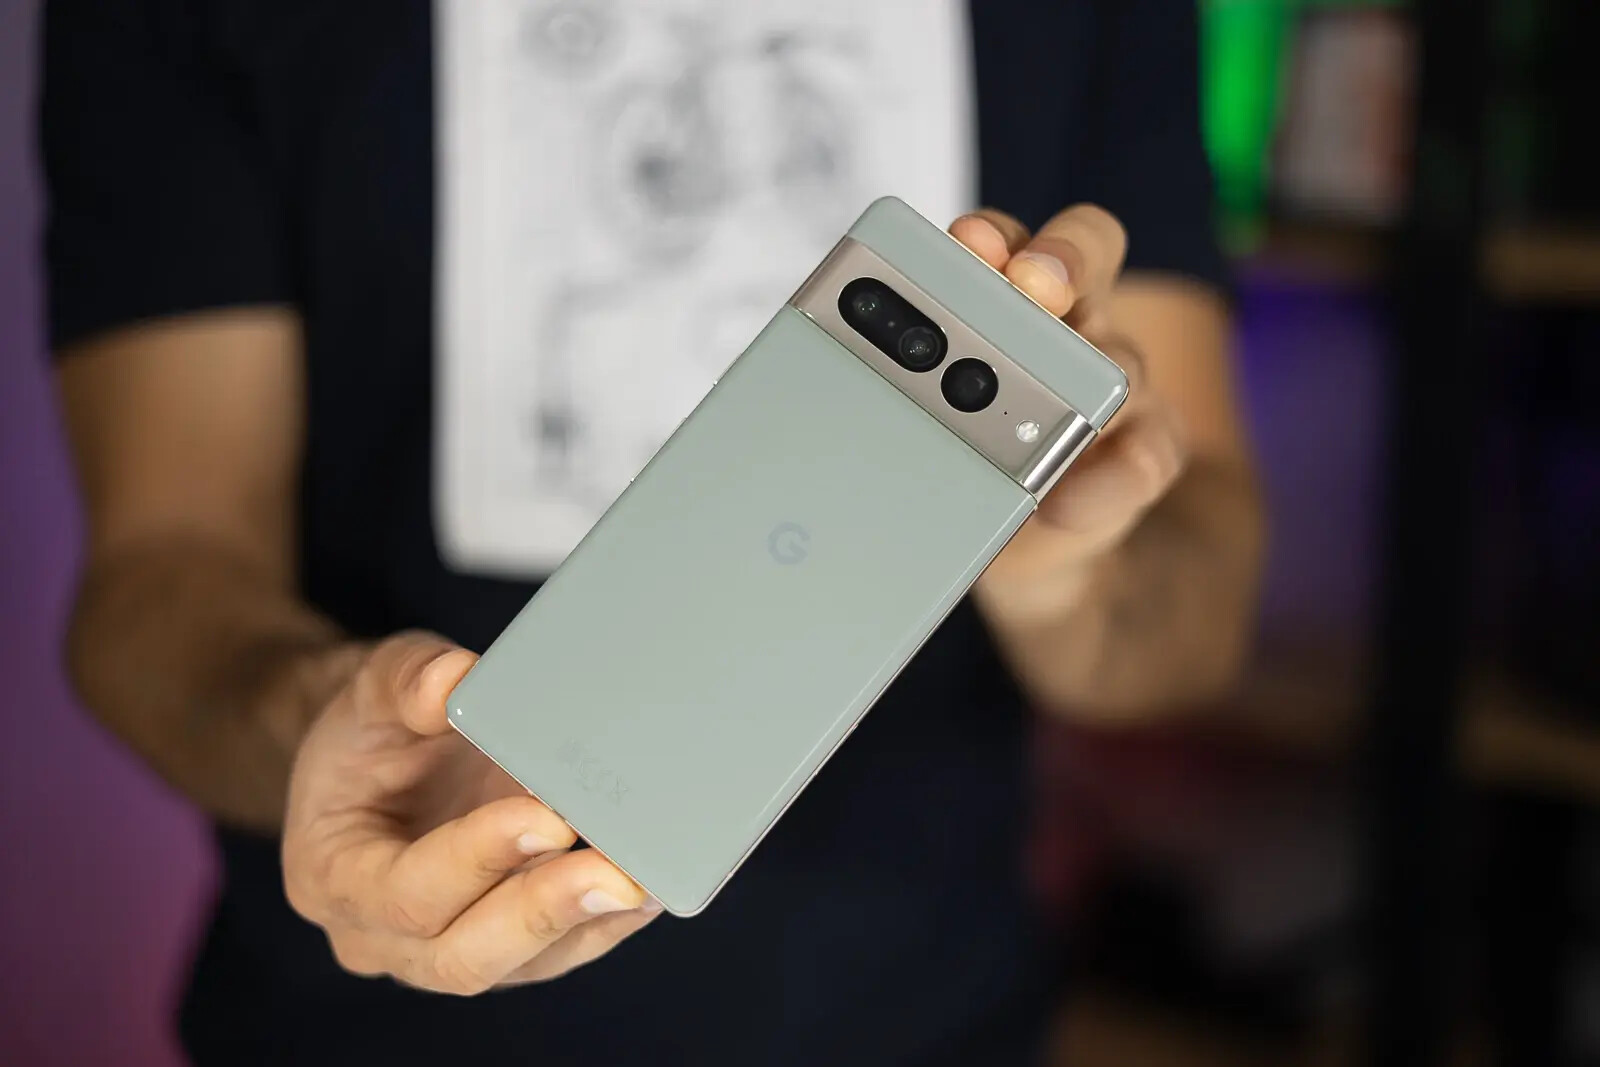 Pixel 7 Pro. This is the Hazel color option, to show the colored camera bar in a golden hue we hope to see on Pixel 8 Pro - Pixel 8 colors: what to expect